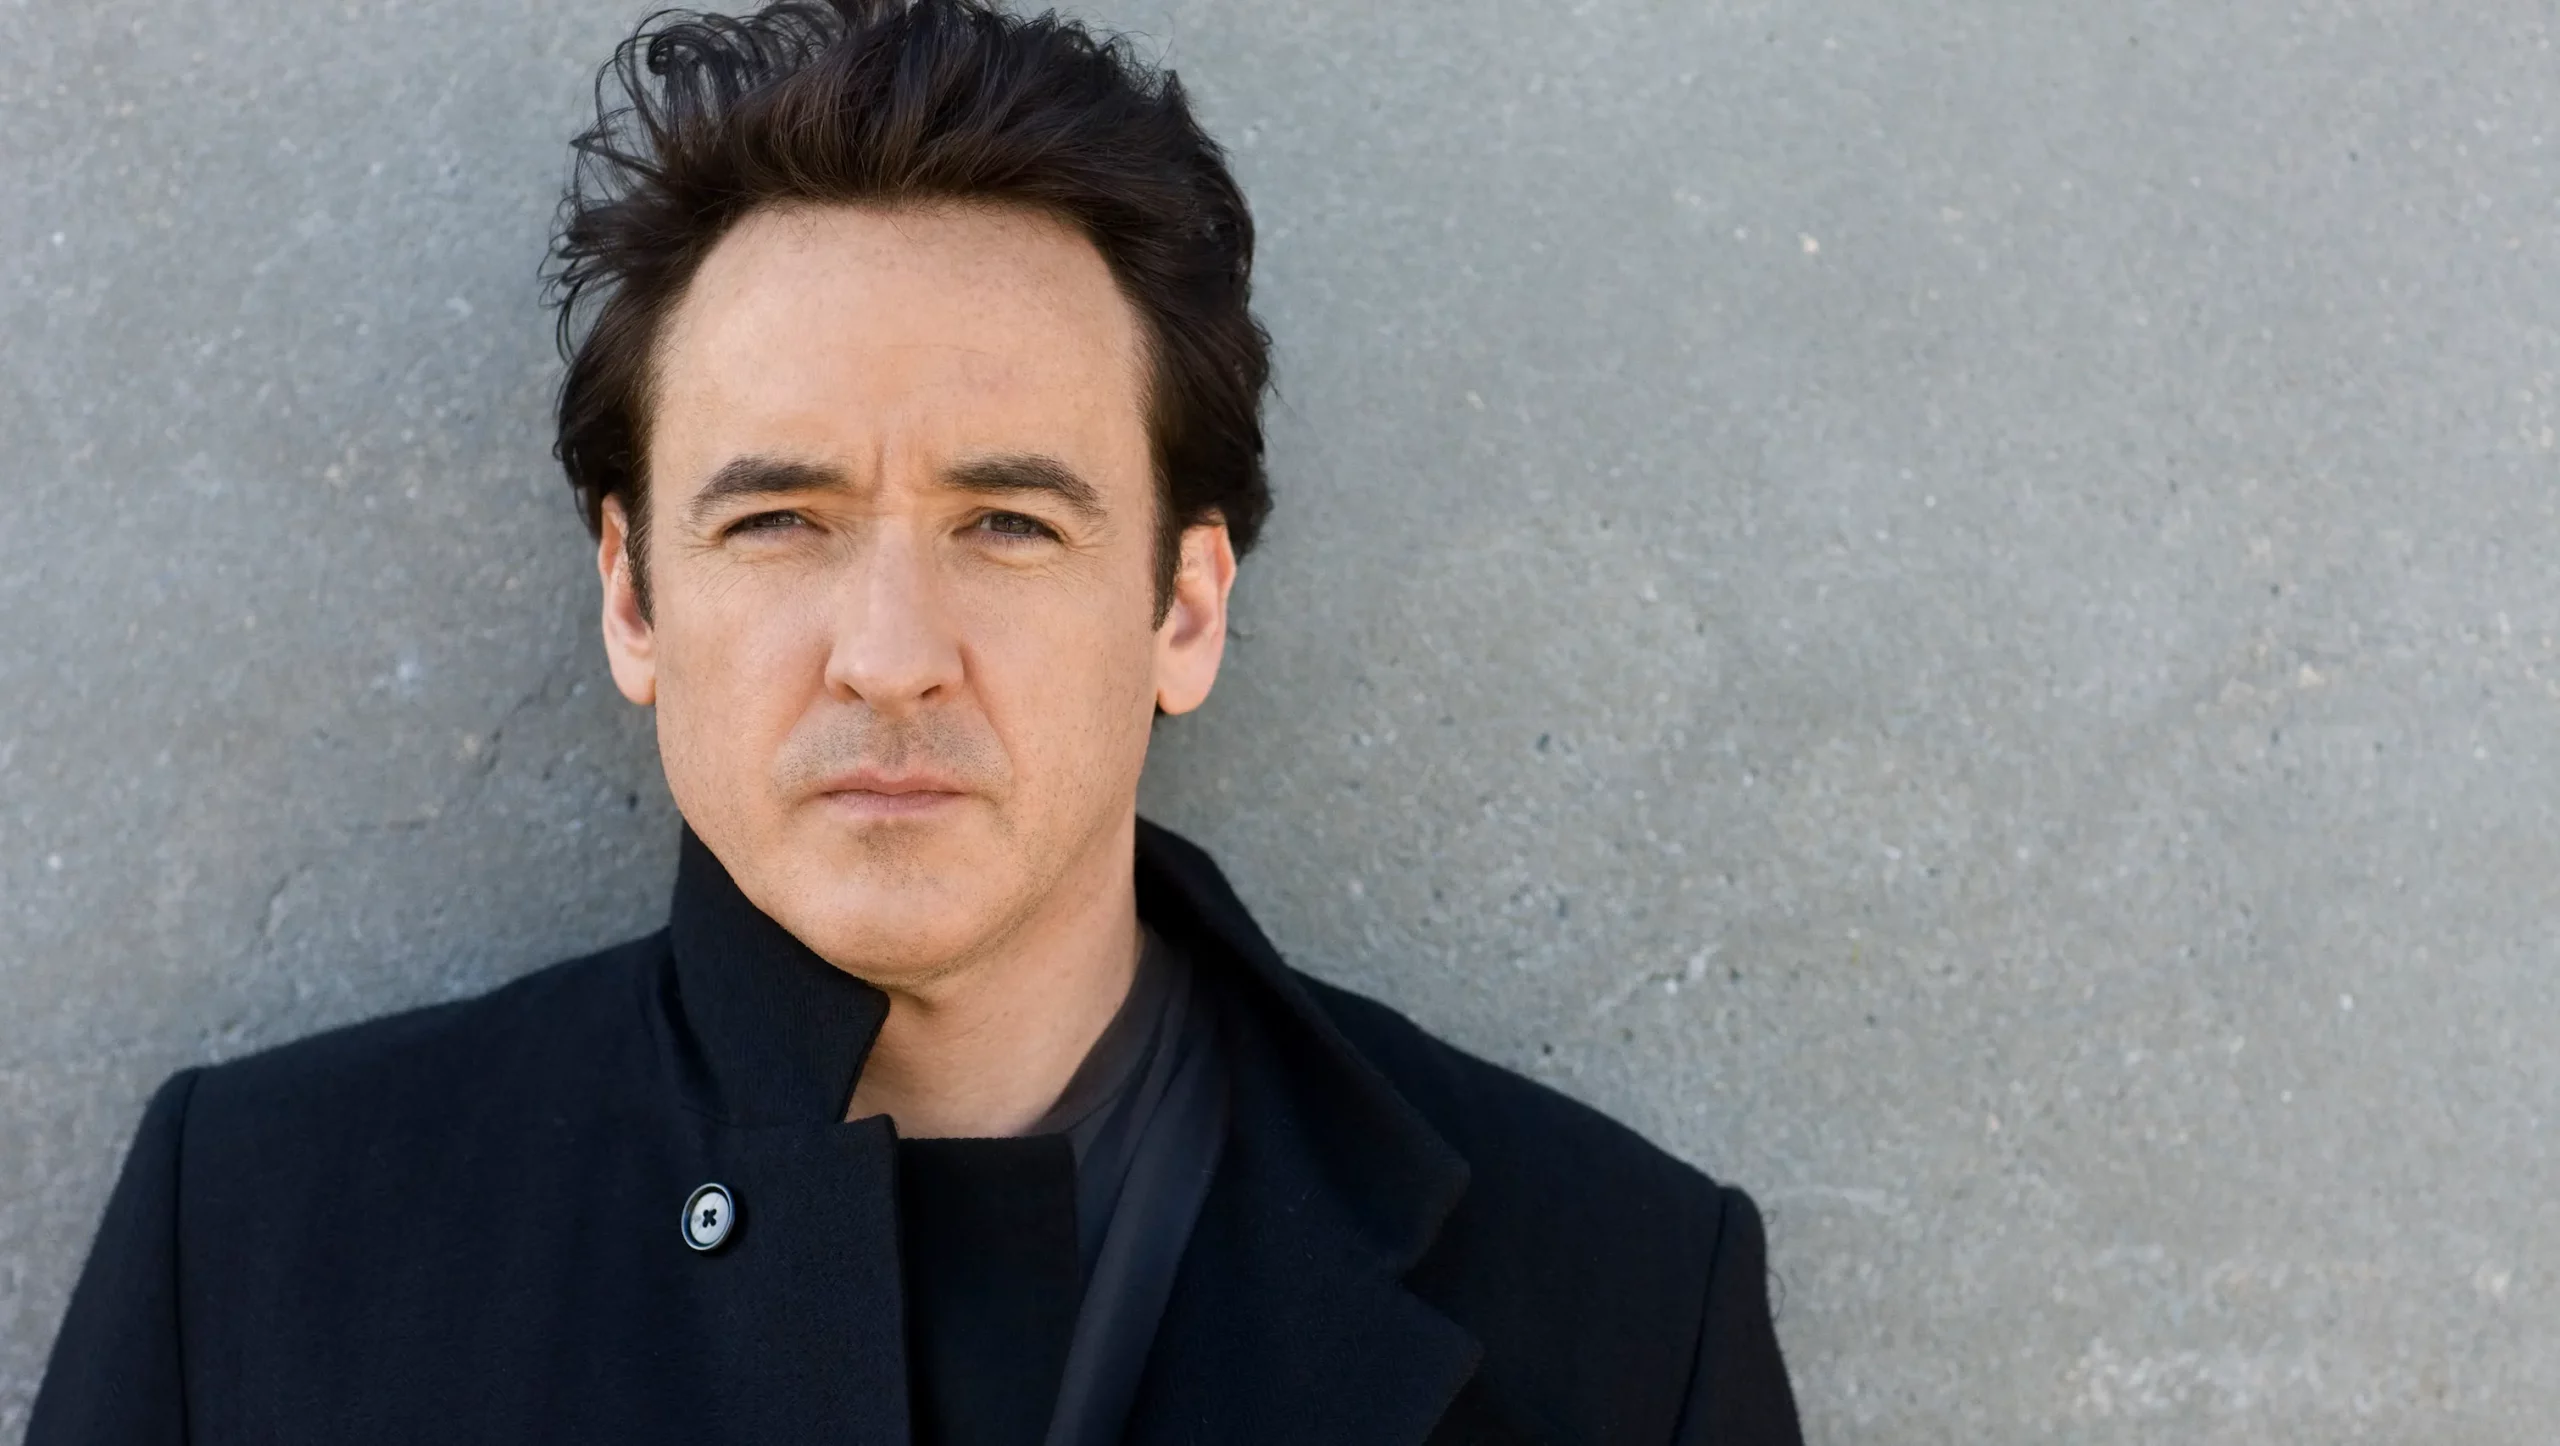 John Cusack And The Art Of Portraying Complex Characters